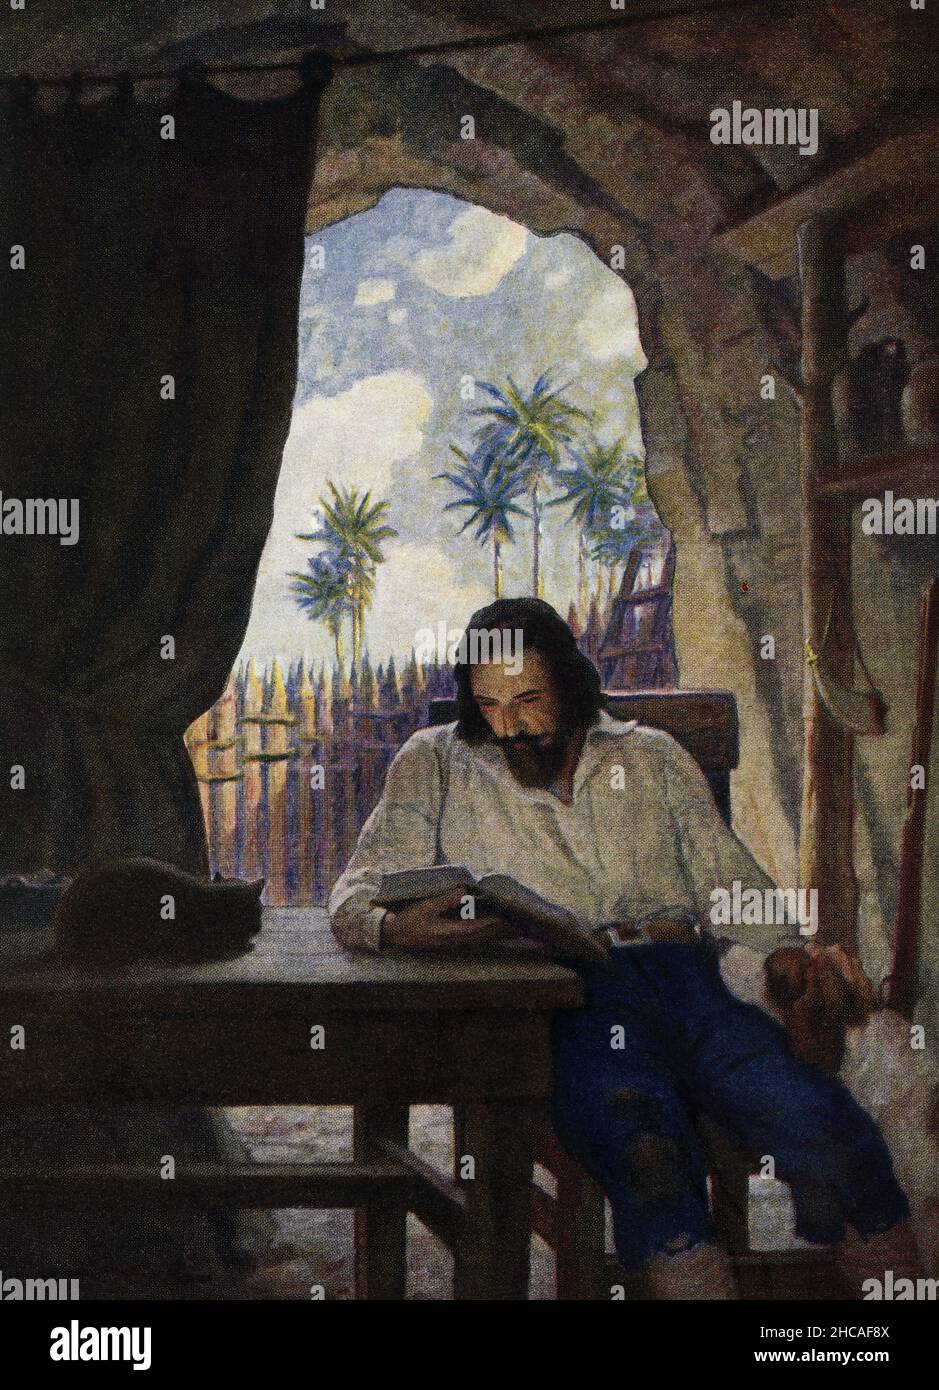 The caption for this image by NC Wyeth that accompanies the tale of Robinson Crusoe by Daniel Defoe reads: ' In the morning I took the Bible. and beginning at the New Testament I began seriously to read it.” Robinson Crusoe is a novel written by the English novelist Daniel Defoe and published in 1719. A fictional autobiography,  it tells the tale of an English castaway named  Robinson Crusoe (seen here with his dog and cat) who spent 28 years on a remote tropical island near Venezuela before he was rescued.  Newell Convers Wyeth, known as N. C. Wyeth, was an American artist and illustrator. He Stock Photo